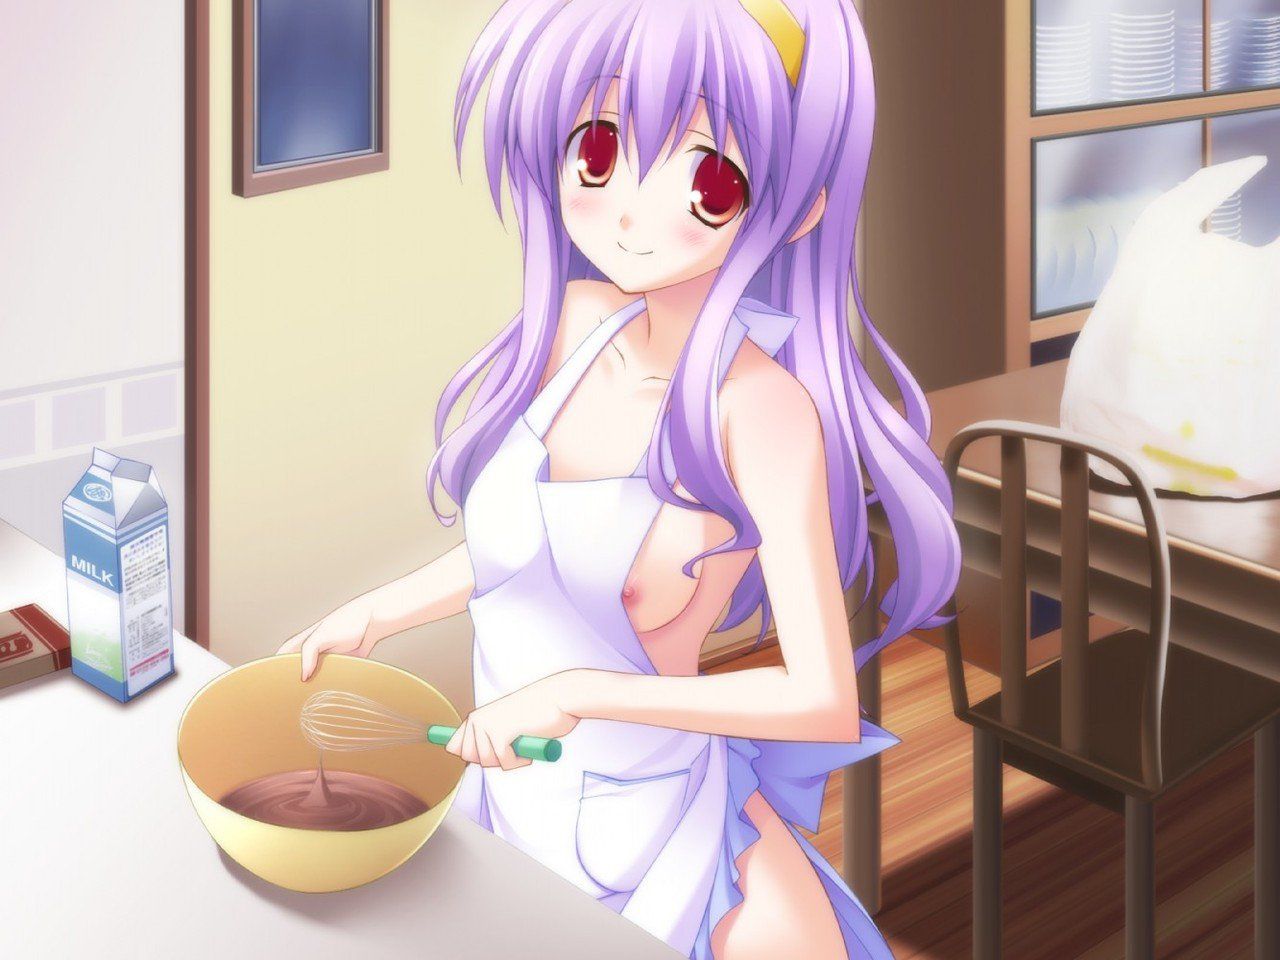 Erotic anime summary Beautiful girls who seem to want to be deliciously dressed in naked apron [secondary erotic] 19